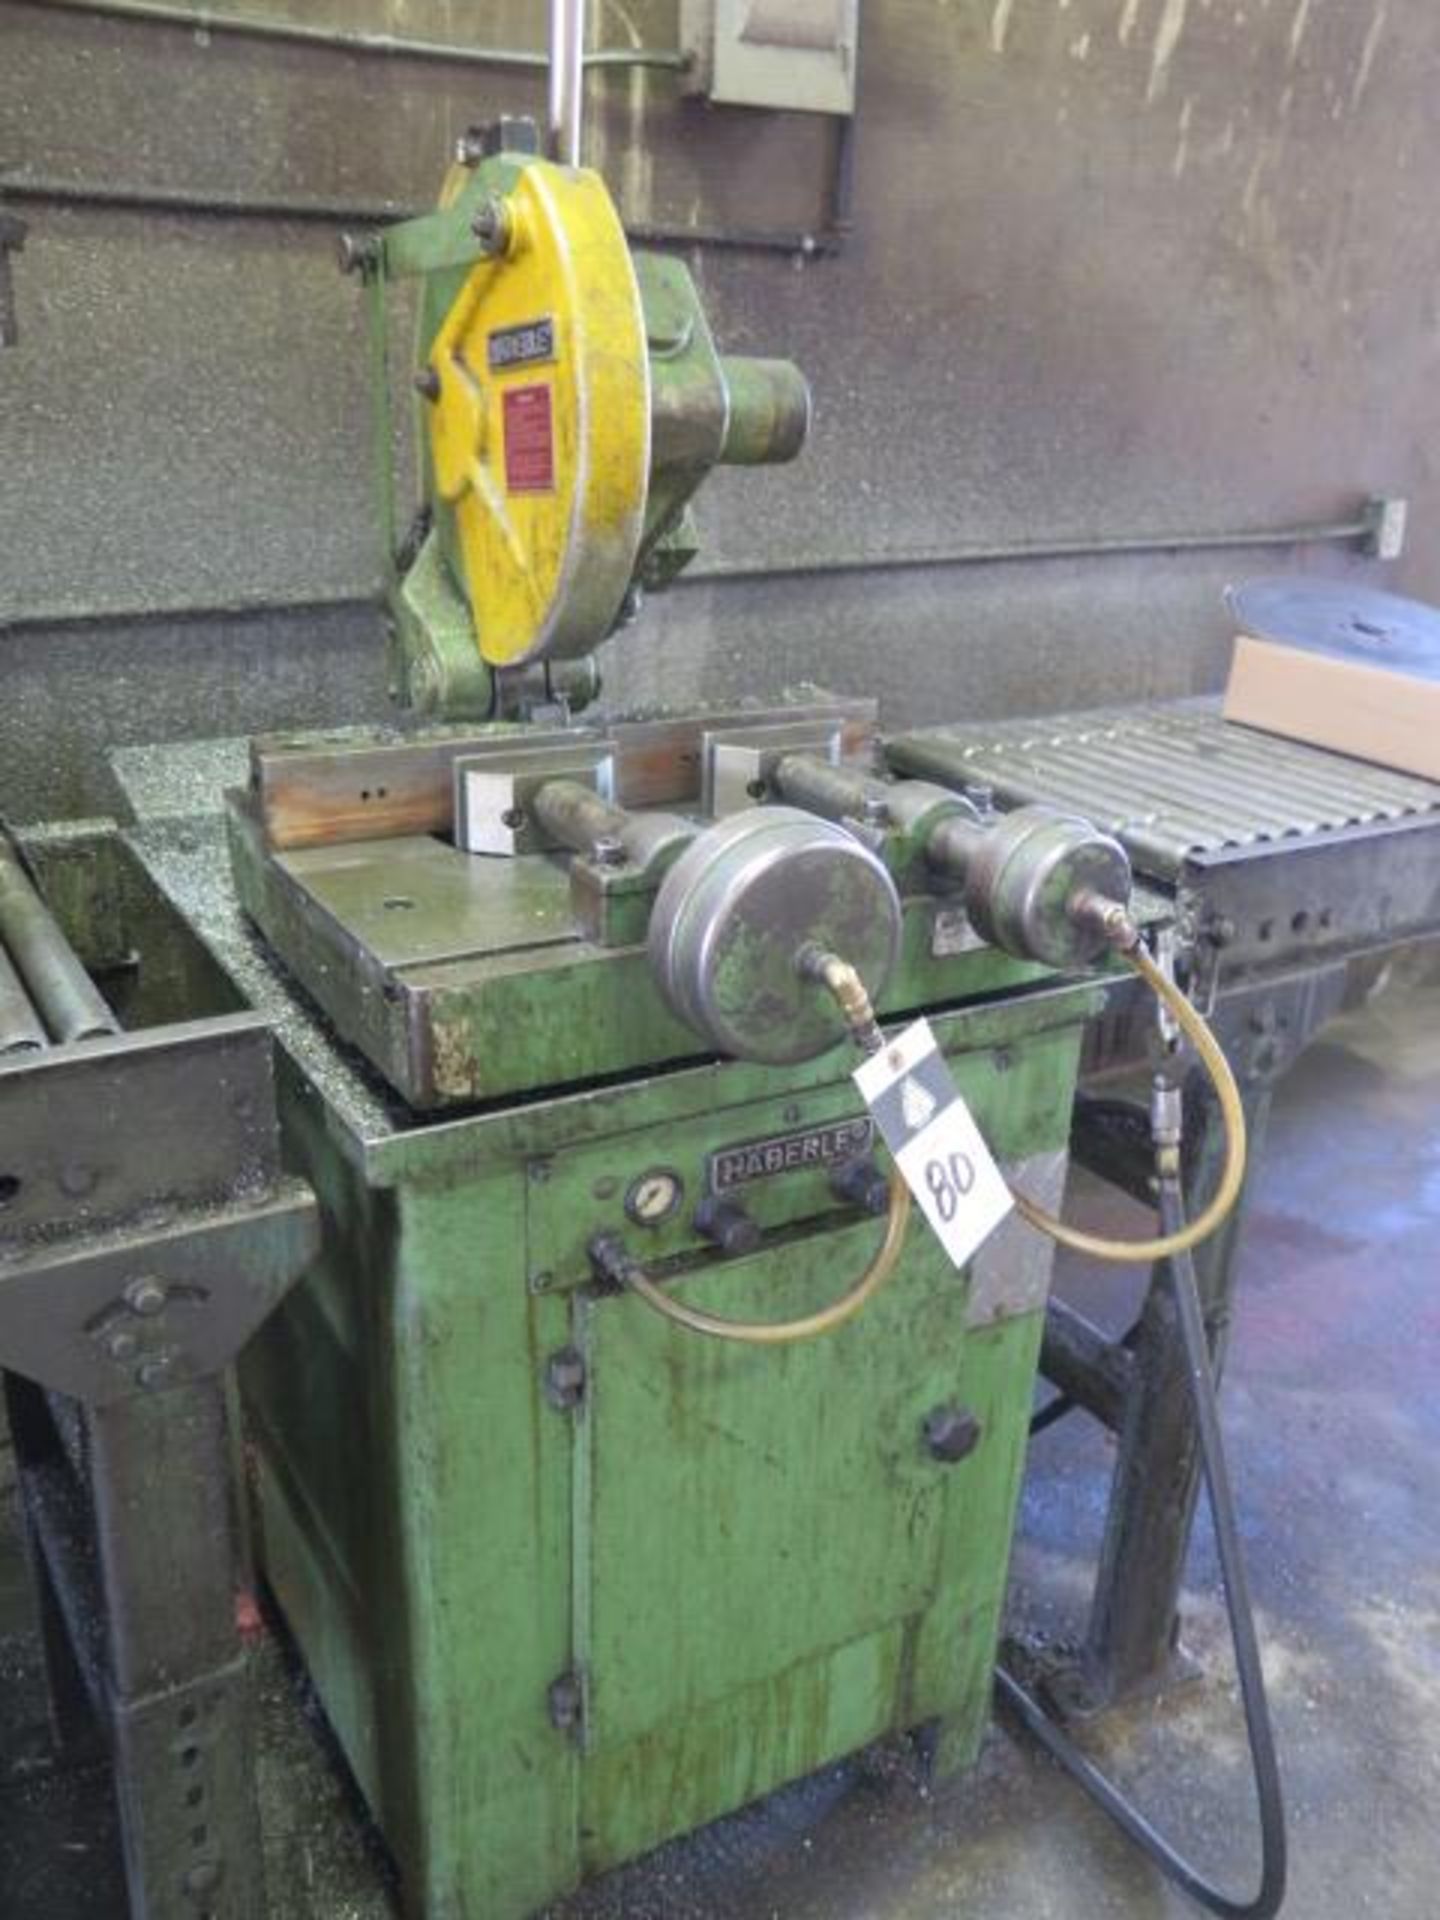 Haberle Miter Cold Saw w/ Pneumatic Clamping, Coolant, Conveyors (SOLD AS-IS - NO WARRANTY) - Image 3 of 13